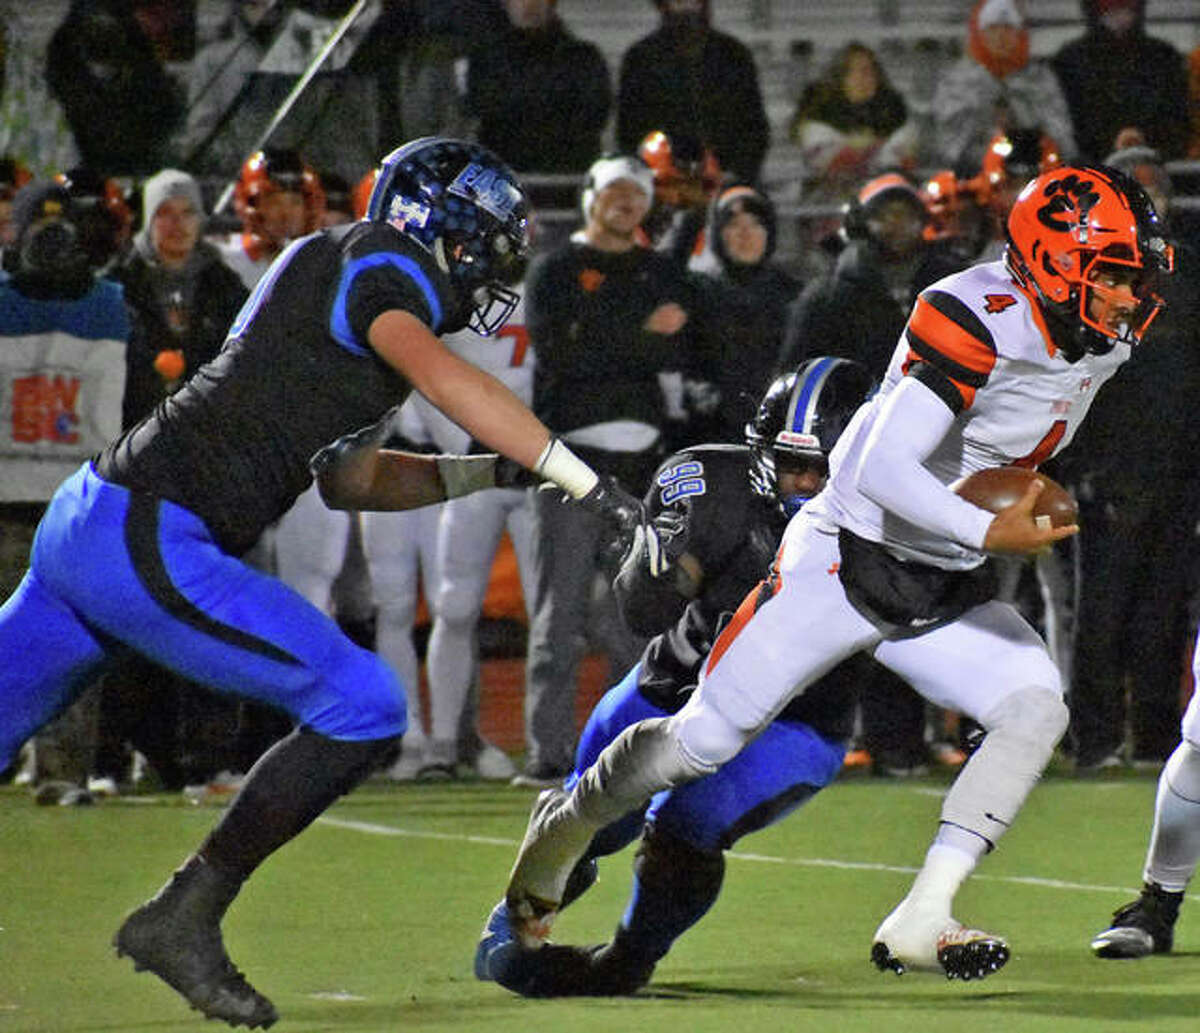 Edwardsville quarterback Kendall Abdur-Rahman, right, breaks a tackle during a 10-yard run in the first quarter against Lincoln-Way East on Saturday in a quarterfinal game in Frankfort.